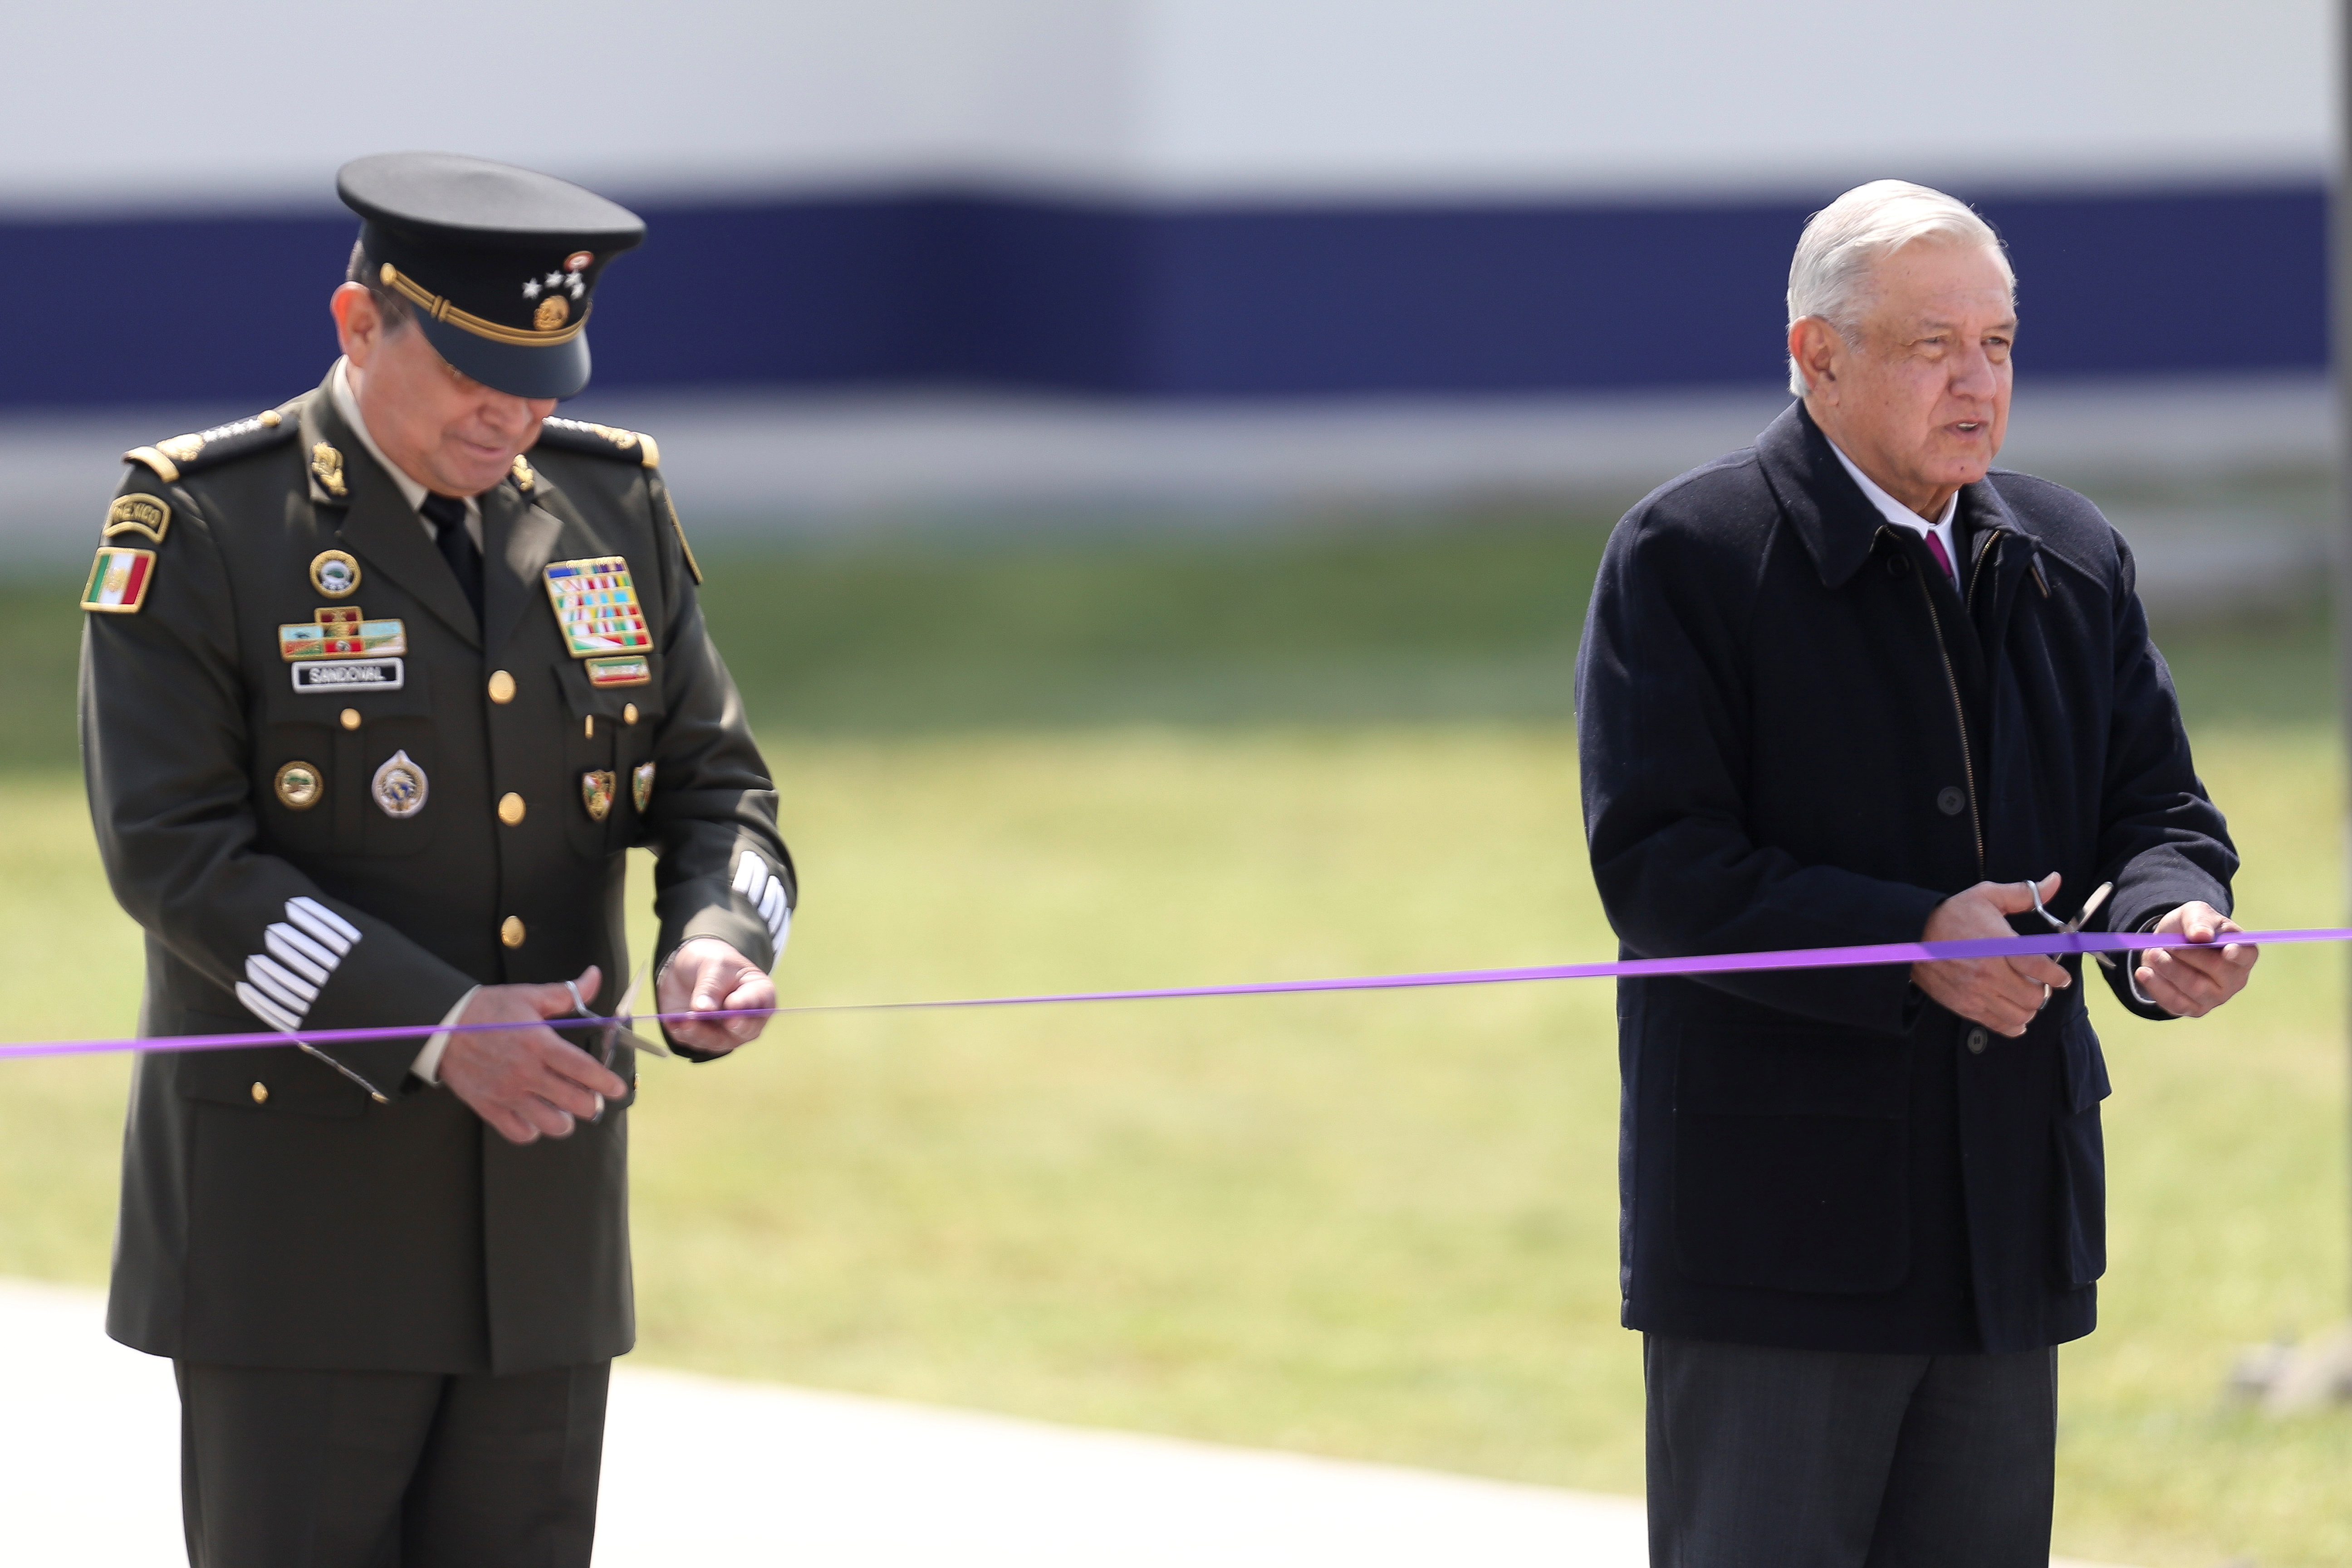 Mexican President Andres Manuel Lopez Obrador and Secretary of Defense Luis Sandoval cut a ribbon during the inauguration of the first stage of the new international airport in Zumpango de Ocampo, at the Santa Lucia military airbase on the outskirts of Mexico City, Mexico February 10, 2021. REUTERS/Edgard Garrido